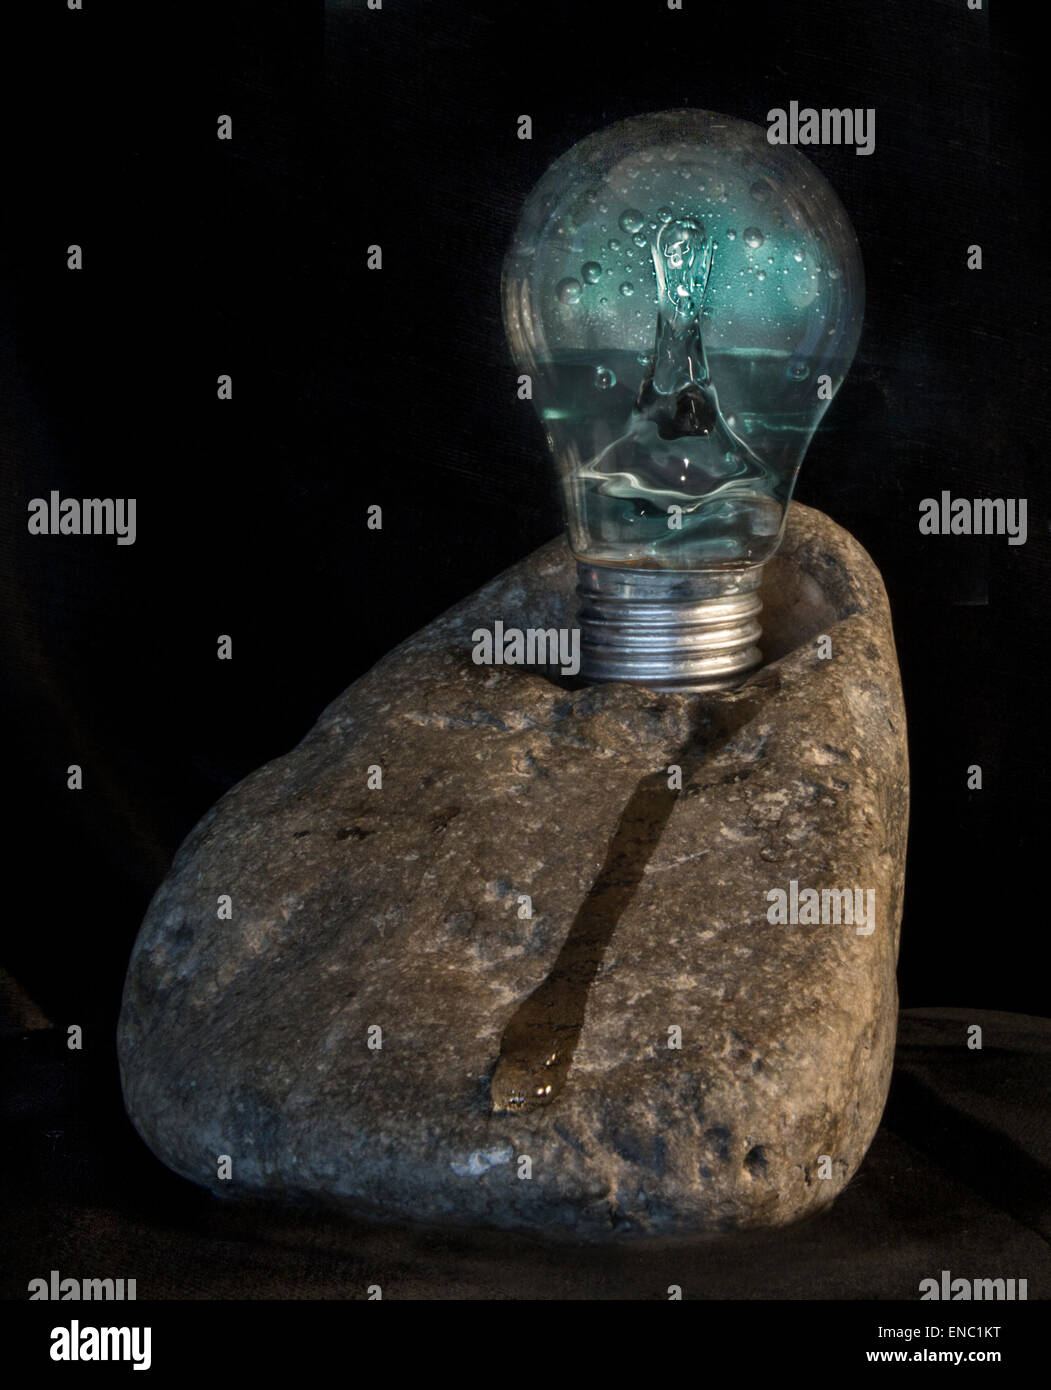 A creative image of hydro energy depicted by a splash of water in a light bulb placed on a rock Stock Photo